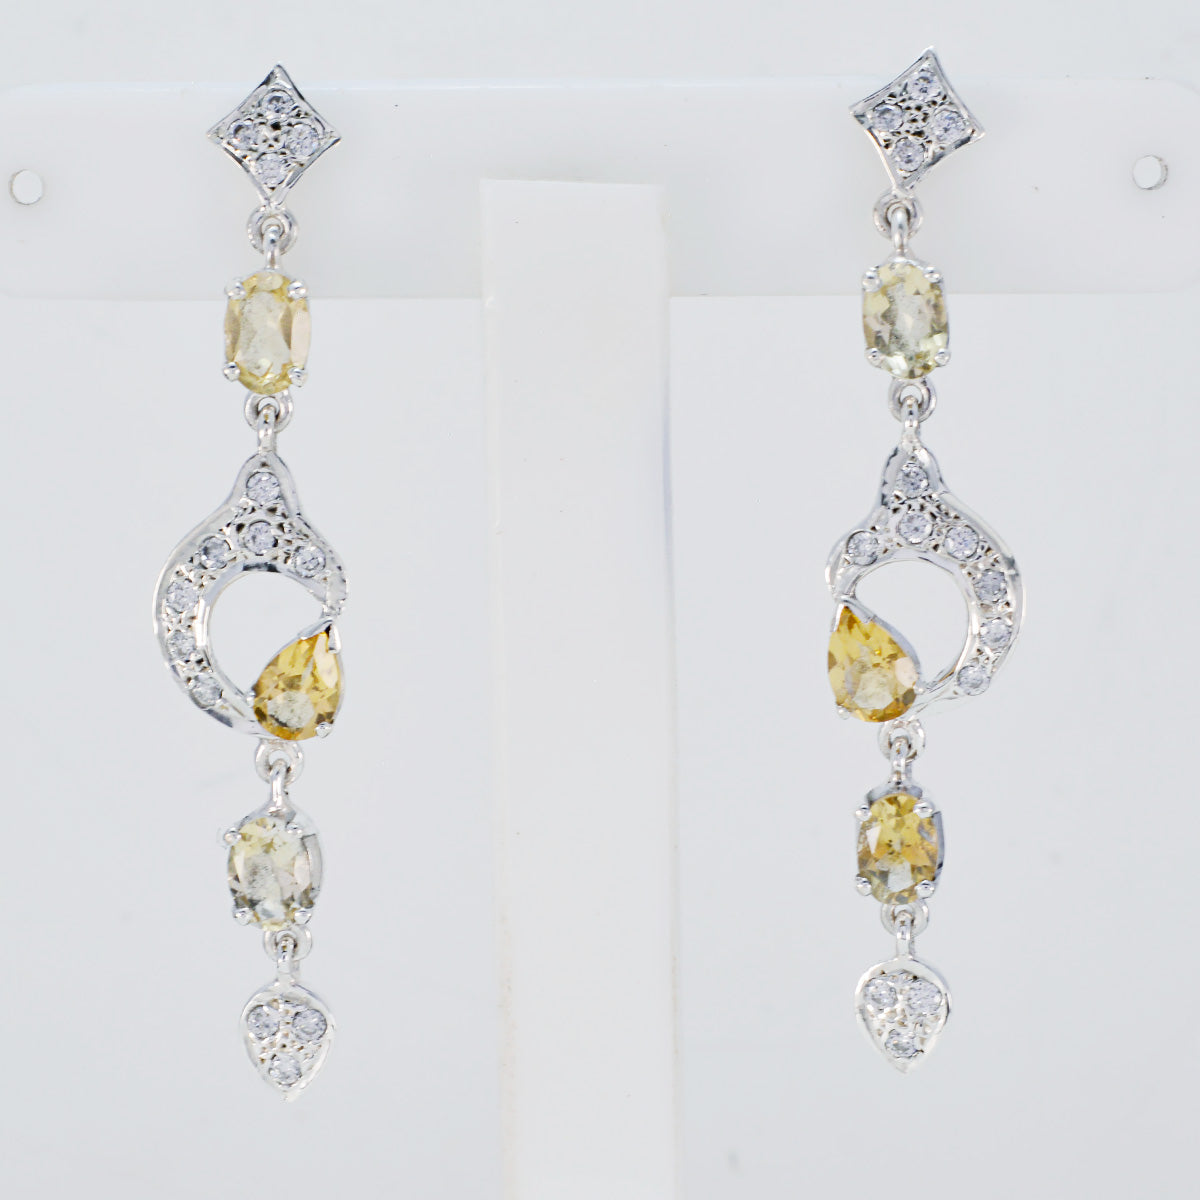 Riyo Good Gemstones multi shape Faceted Yellow Citrine Silver Earrings boxing day gift